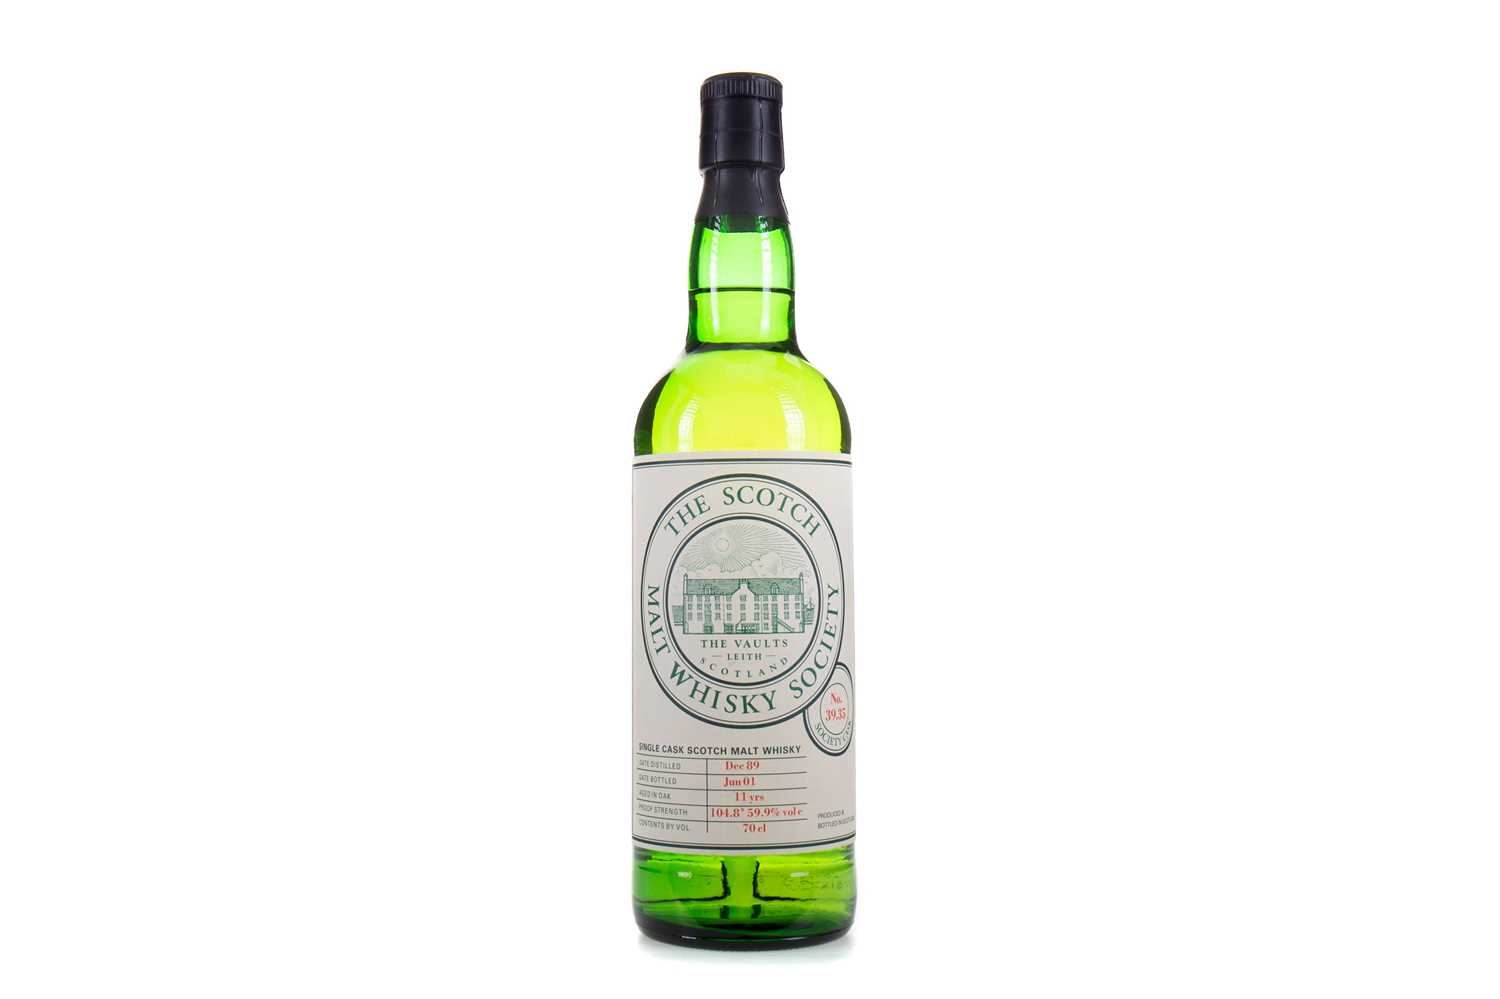 Lot 562 - SMWS 39.35 LINKWOOD 1989 11 YEAR OLD